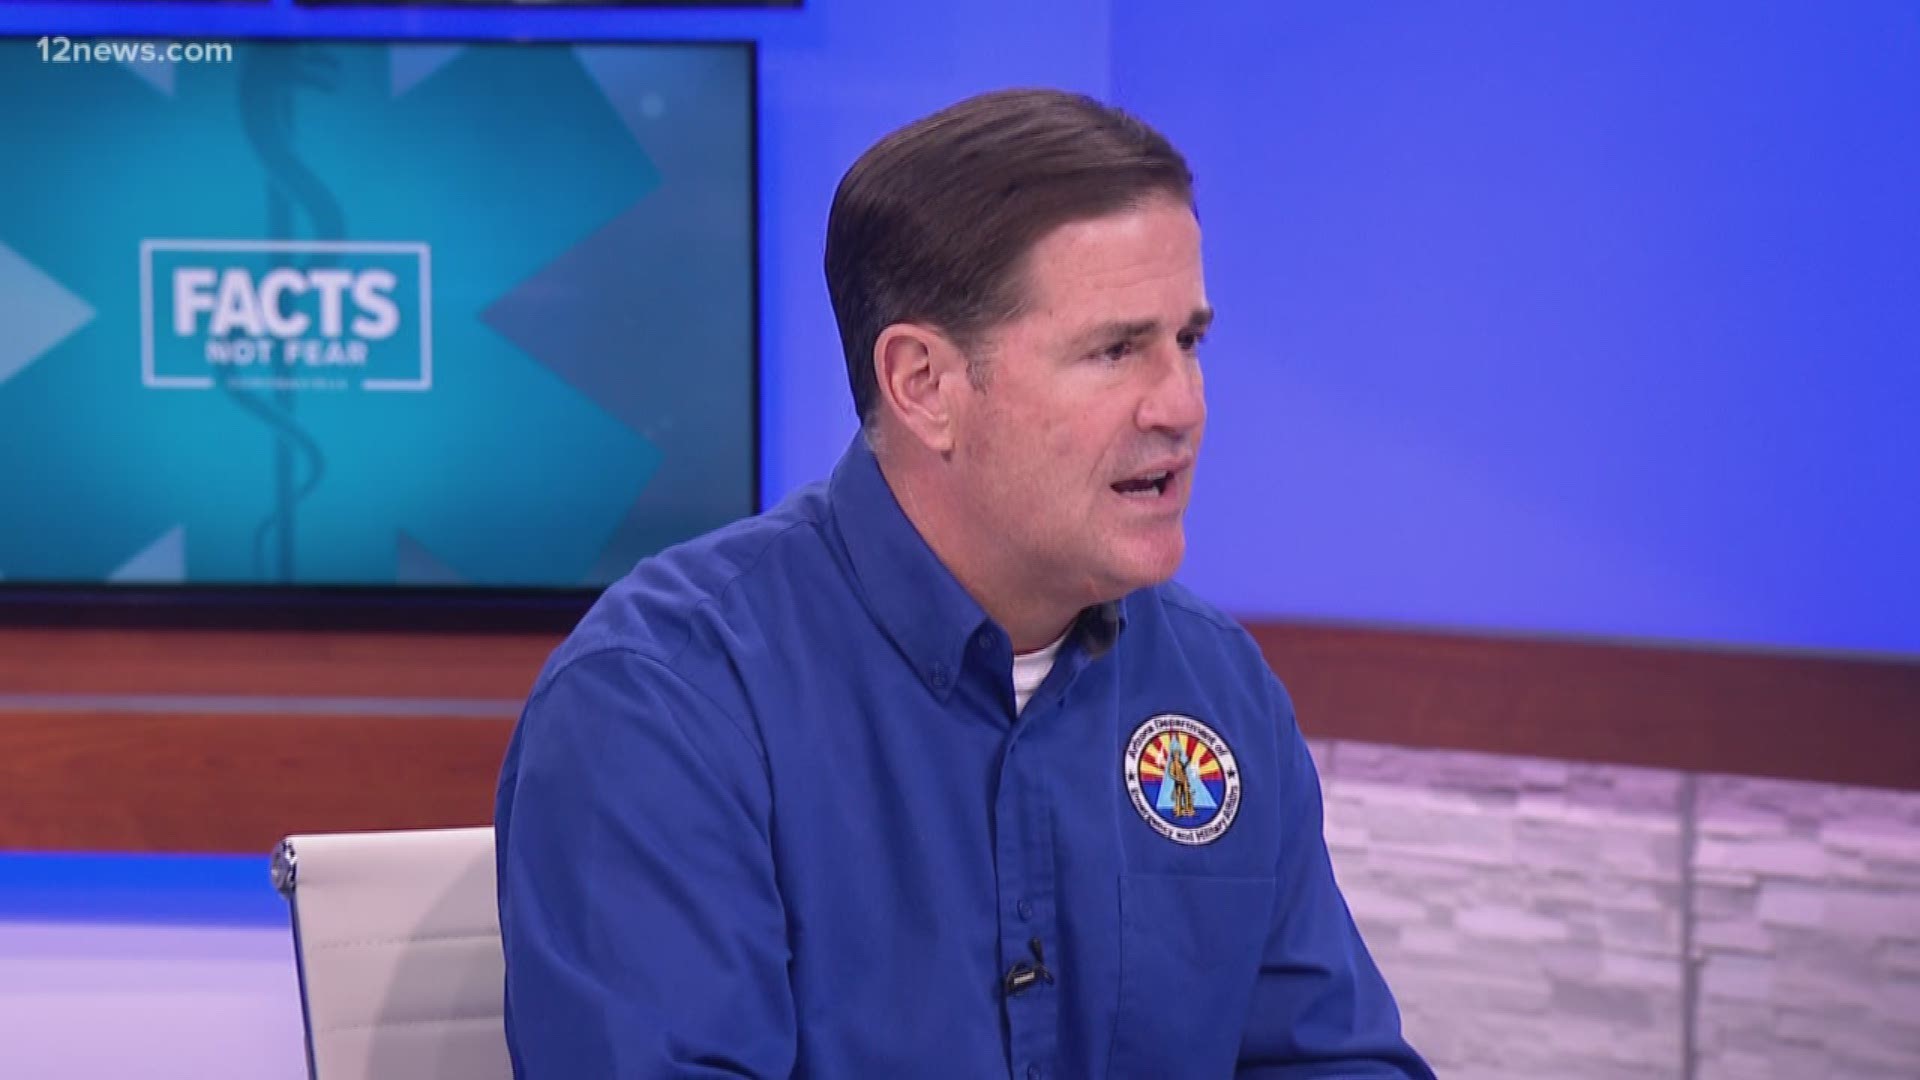 Governor Doug Ducey was in Studio 12A answering questions from viewers and addressing the need to get PPE to first responders and healthcare workers.